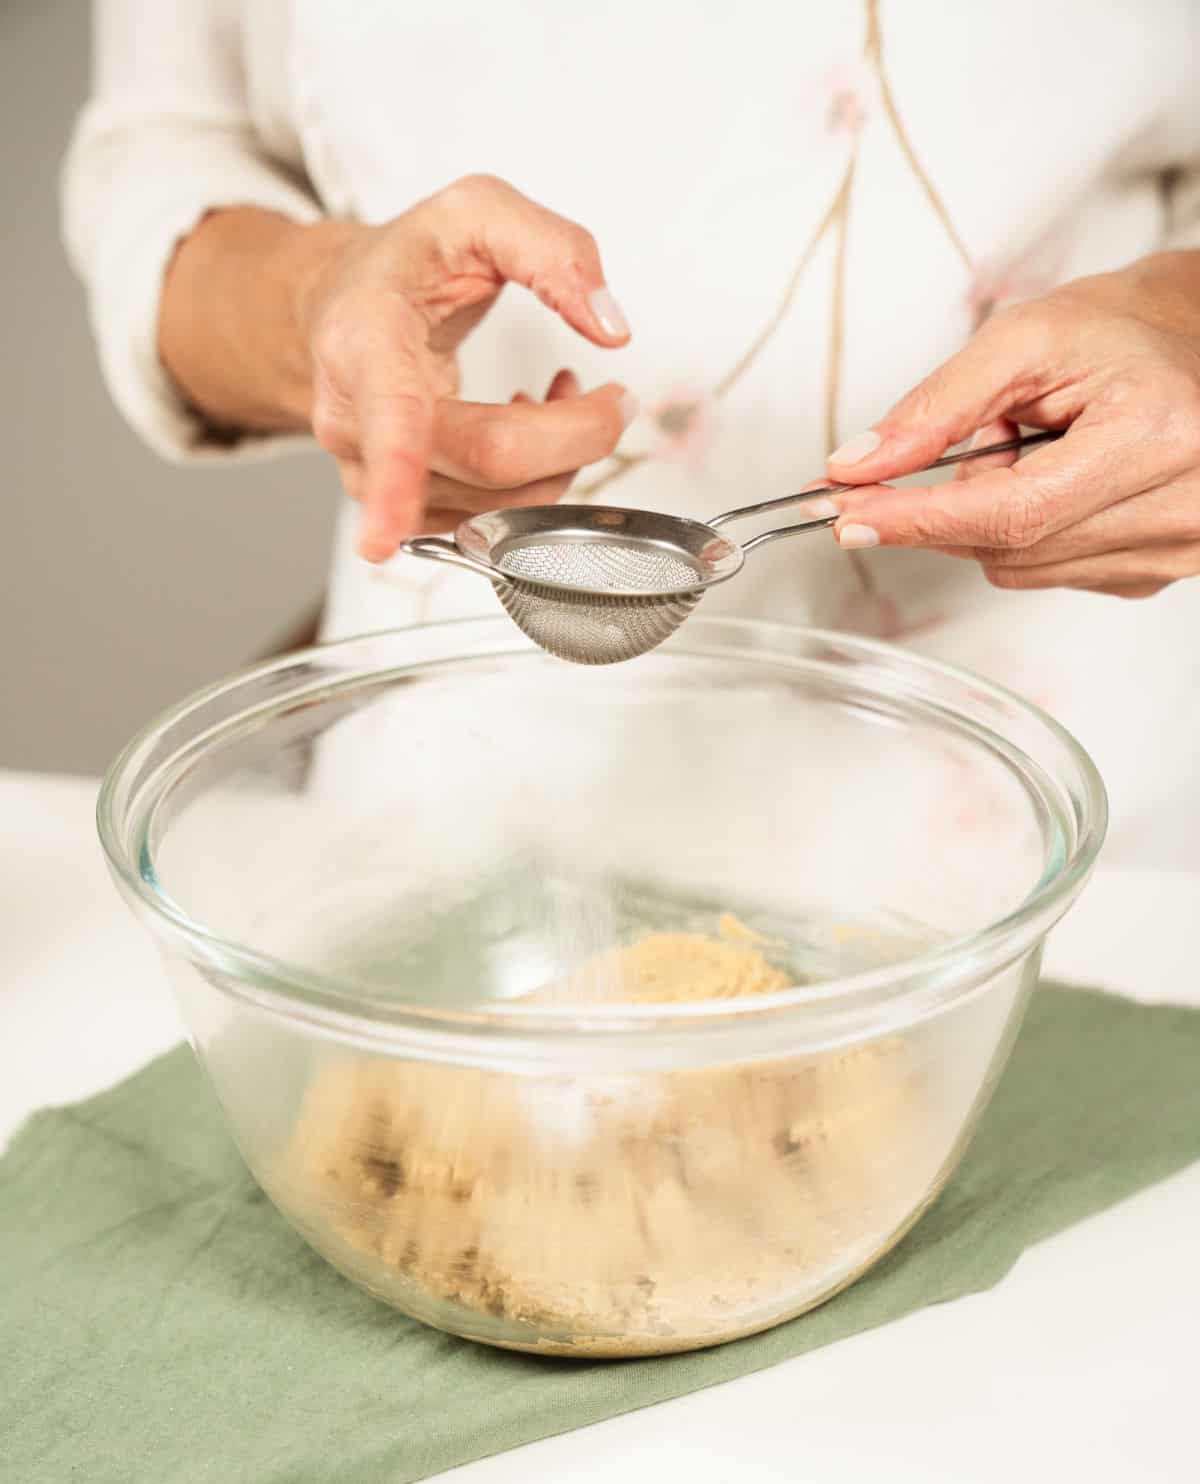 Sifting baking soda over oatmeal cookie dough on a glass bowl with green cloth underneath.